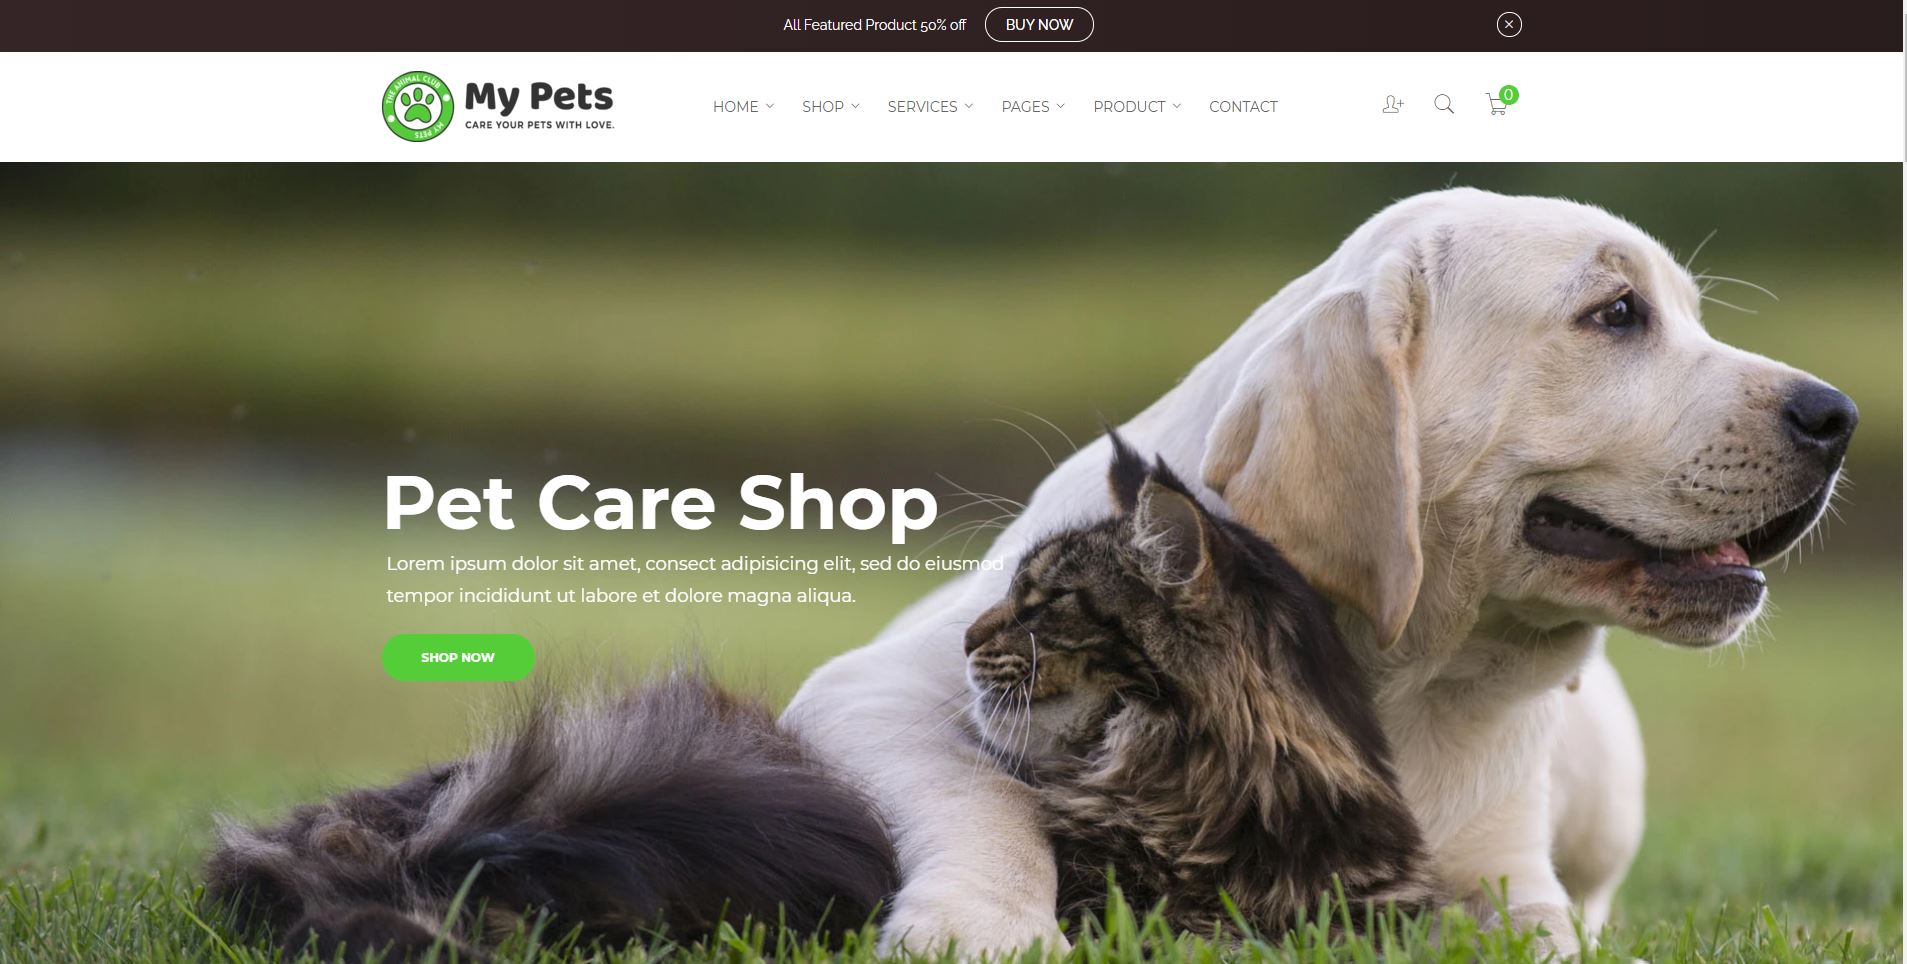 Shopify pet store theme: Top 15 best themes to start the online business